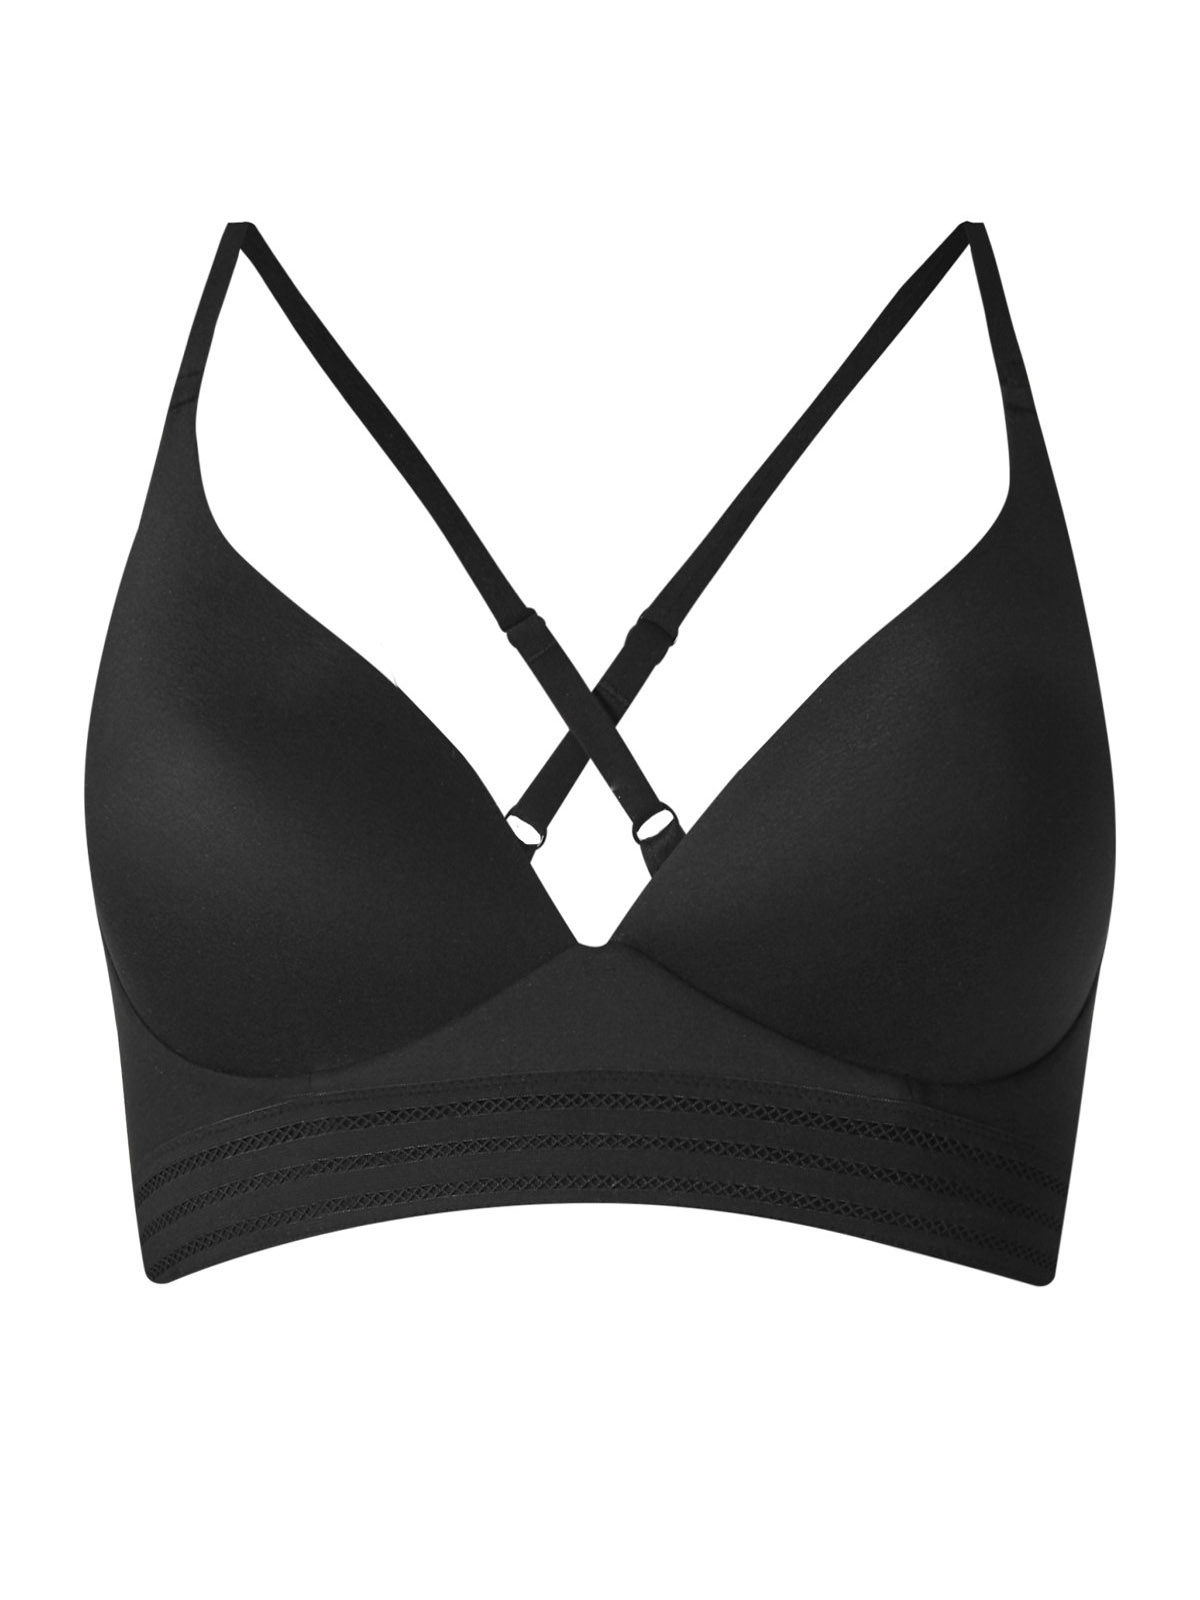 Marks and Spencer - - M&5 ASSORTED Plain, Lace & Satin Bras - Size 32 ...